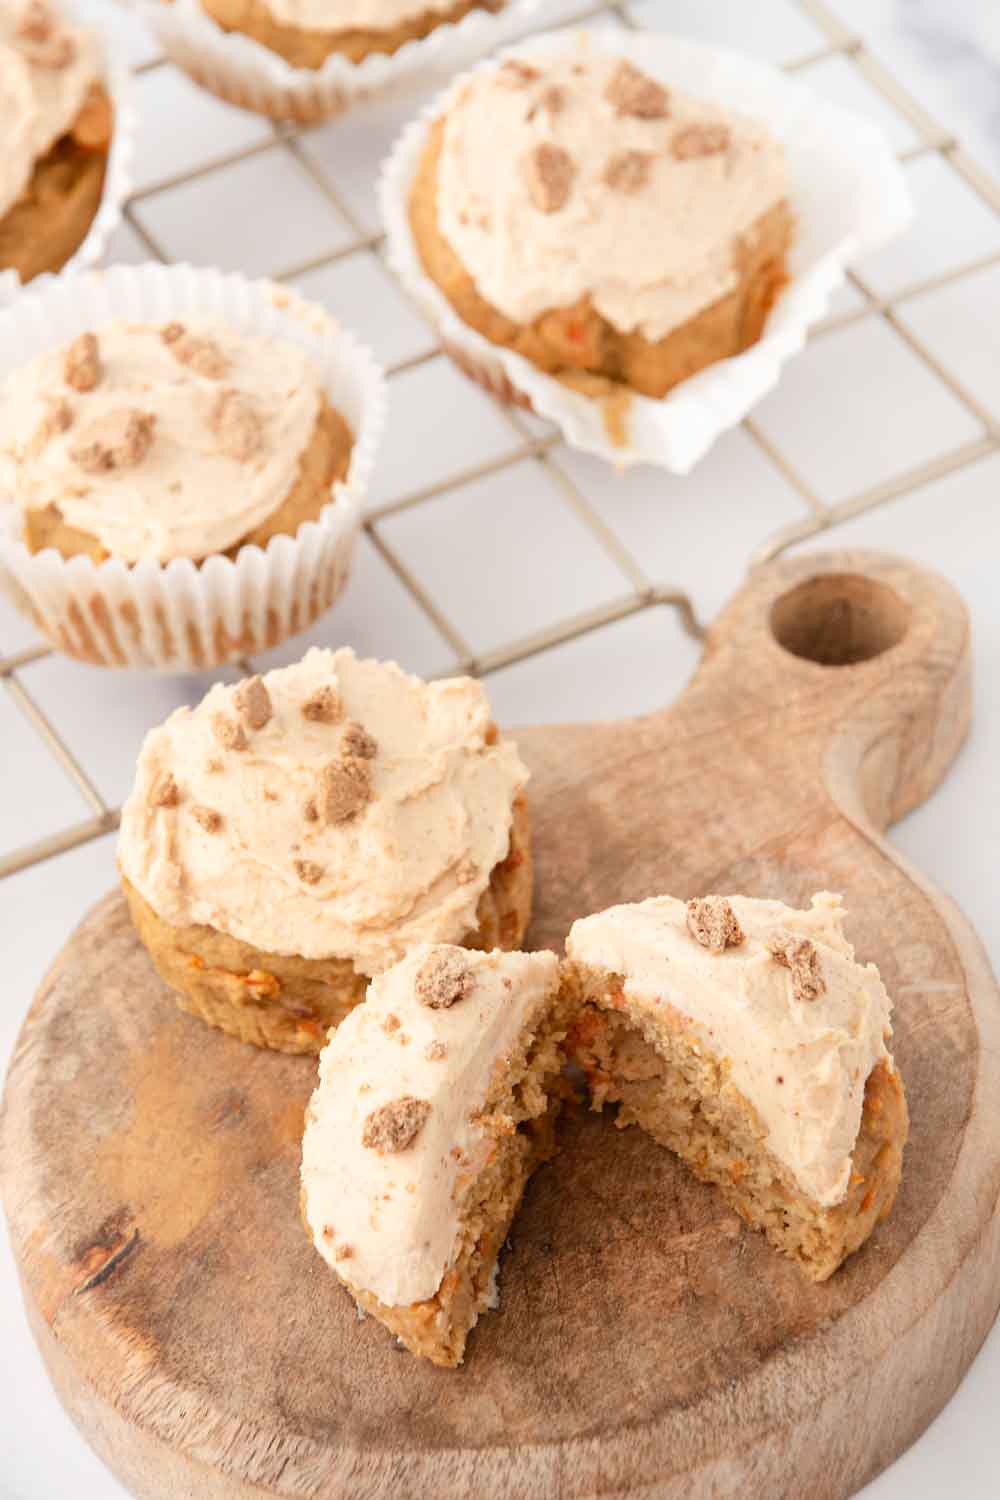 Homemade carrot cupcakes for dogs with peanut butter frosting.